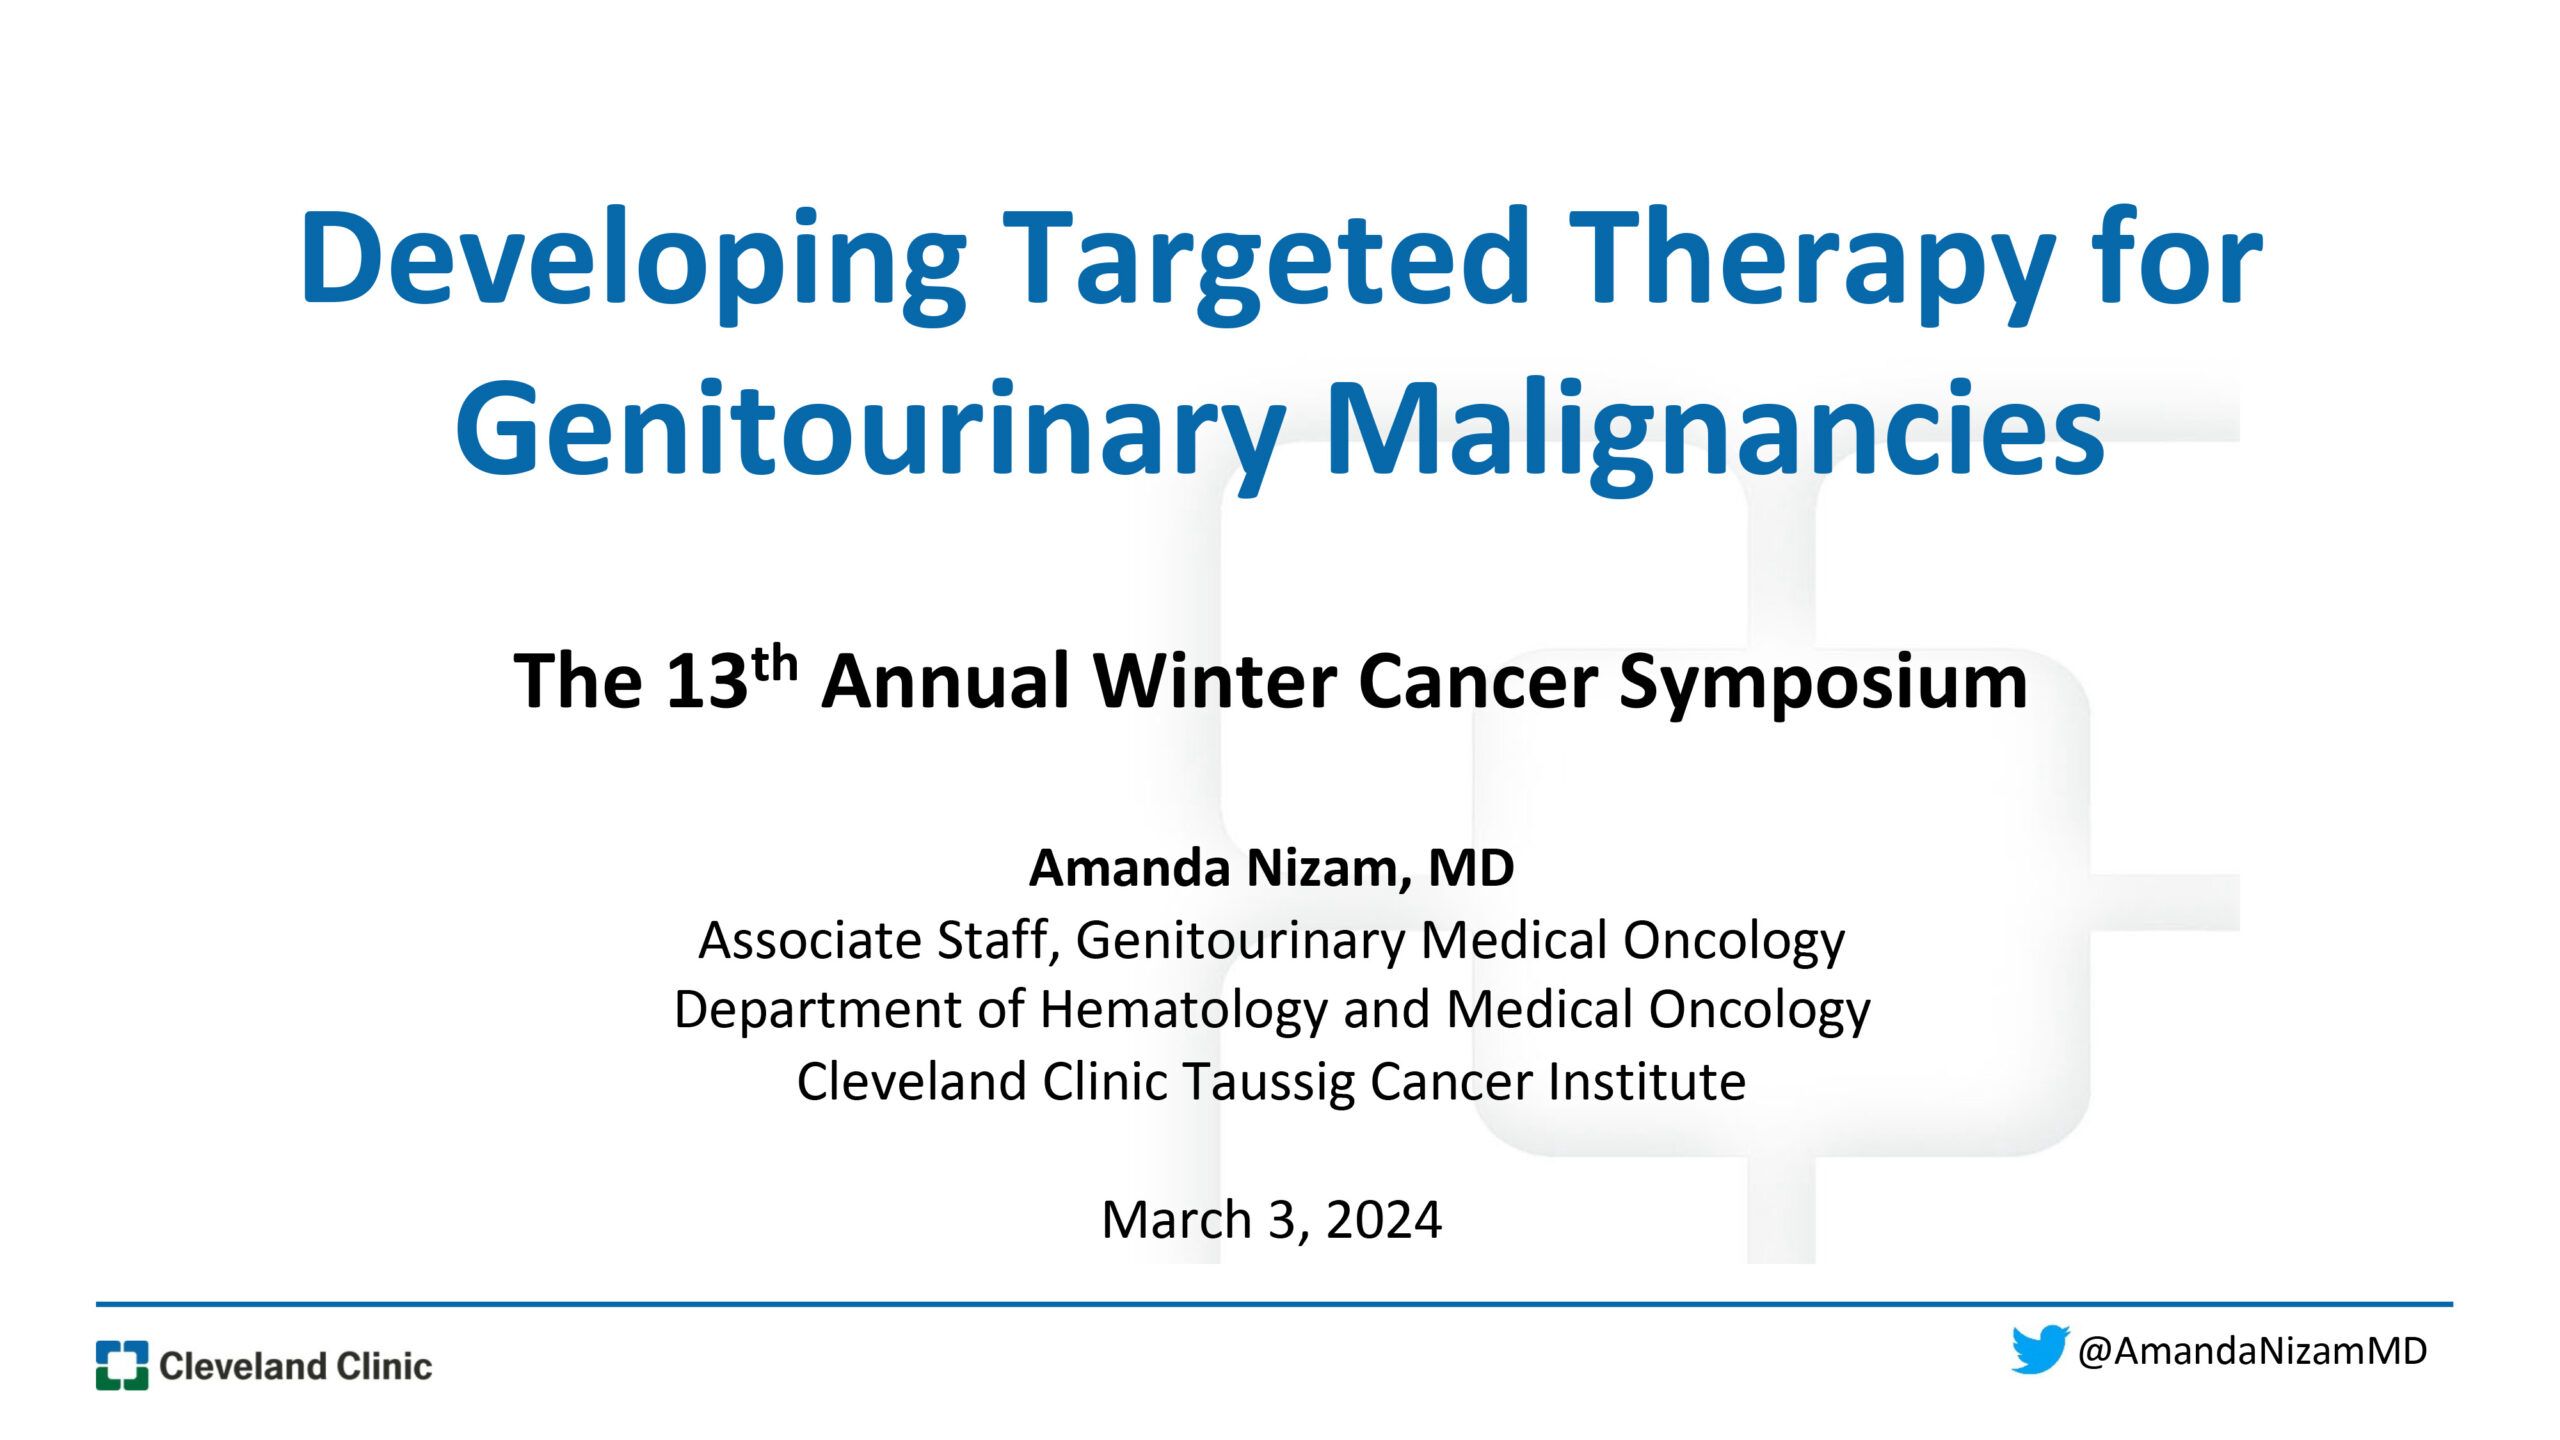 Developing Targeted Therapy for Genito-Urinary Malignancies